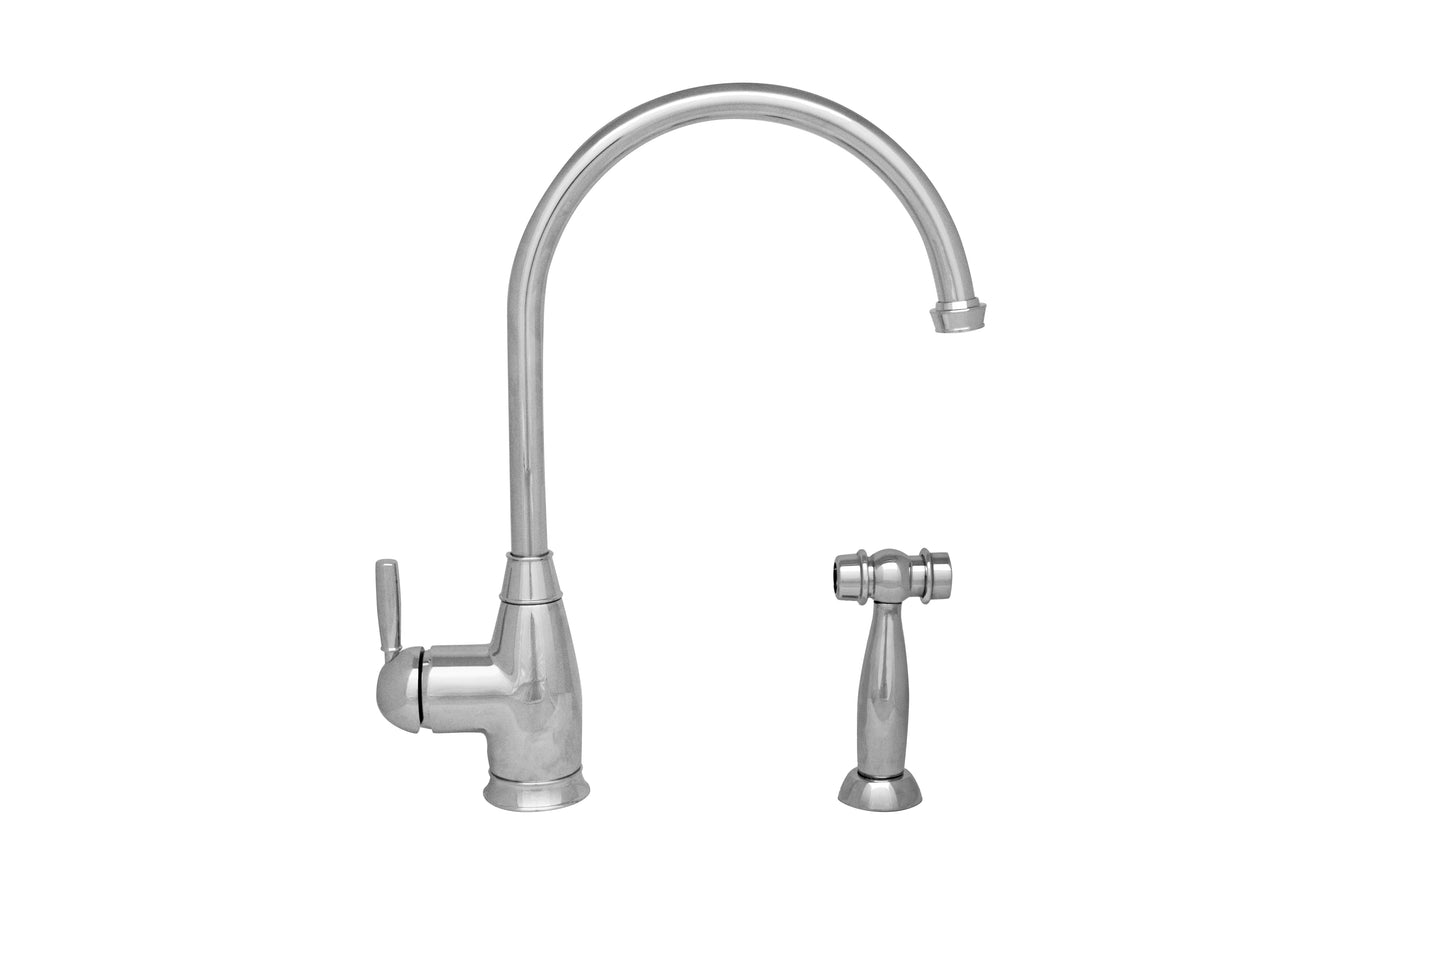 Queenhaus Single Lever Faucet with aLong Gooseneck Spout, Solid Single Lever Handle and Solid Brass Side Spray